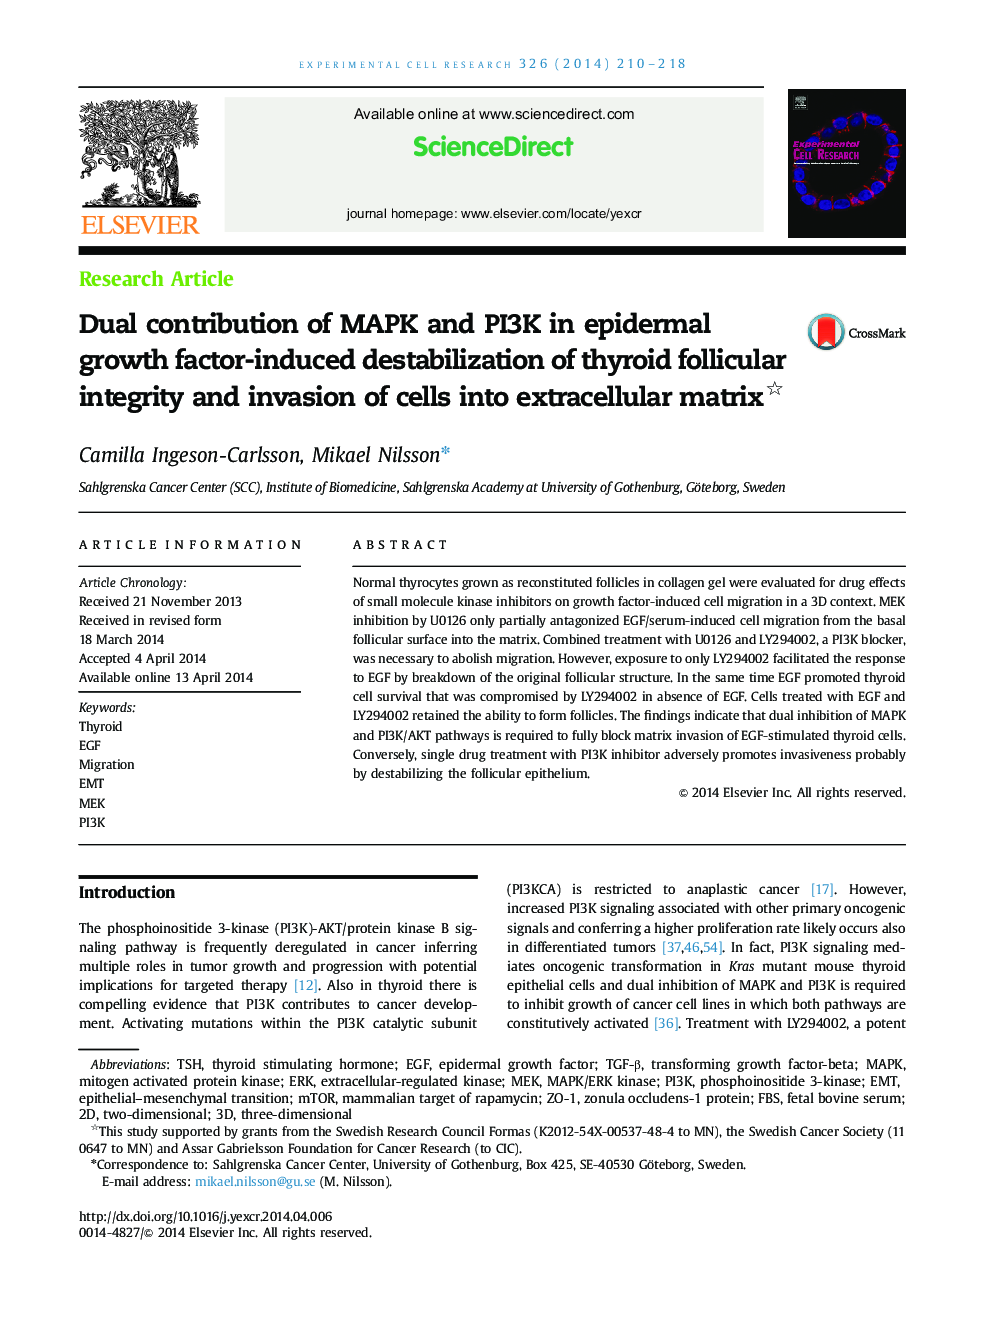 Dual contribution of MAPK and PI3K in epidermal growth factor-induced destabilization of thyroid follicular integrity and invasion of cells into extracellular matrix 